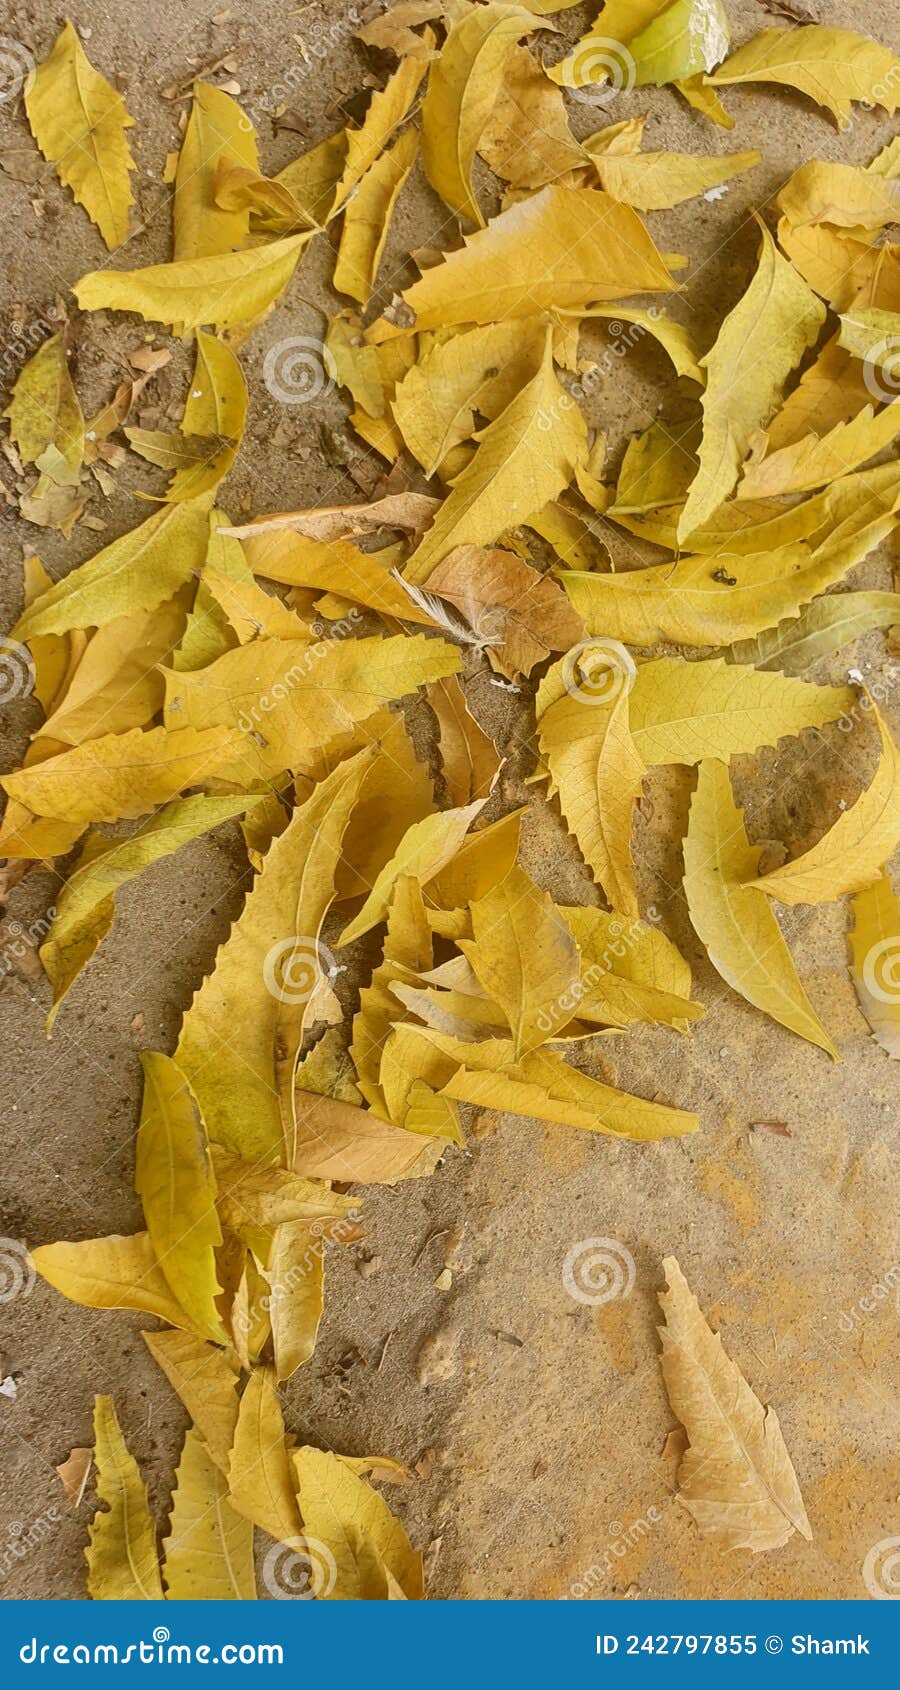 Yellow Dried Leaves of Neem Tree on the Ground. Stock Image